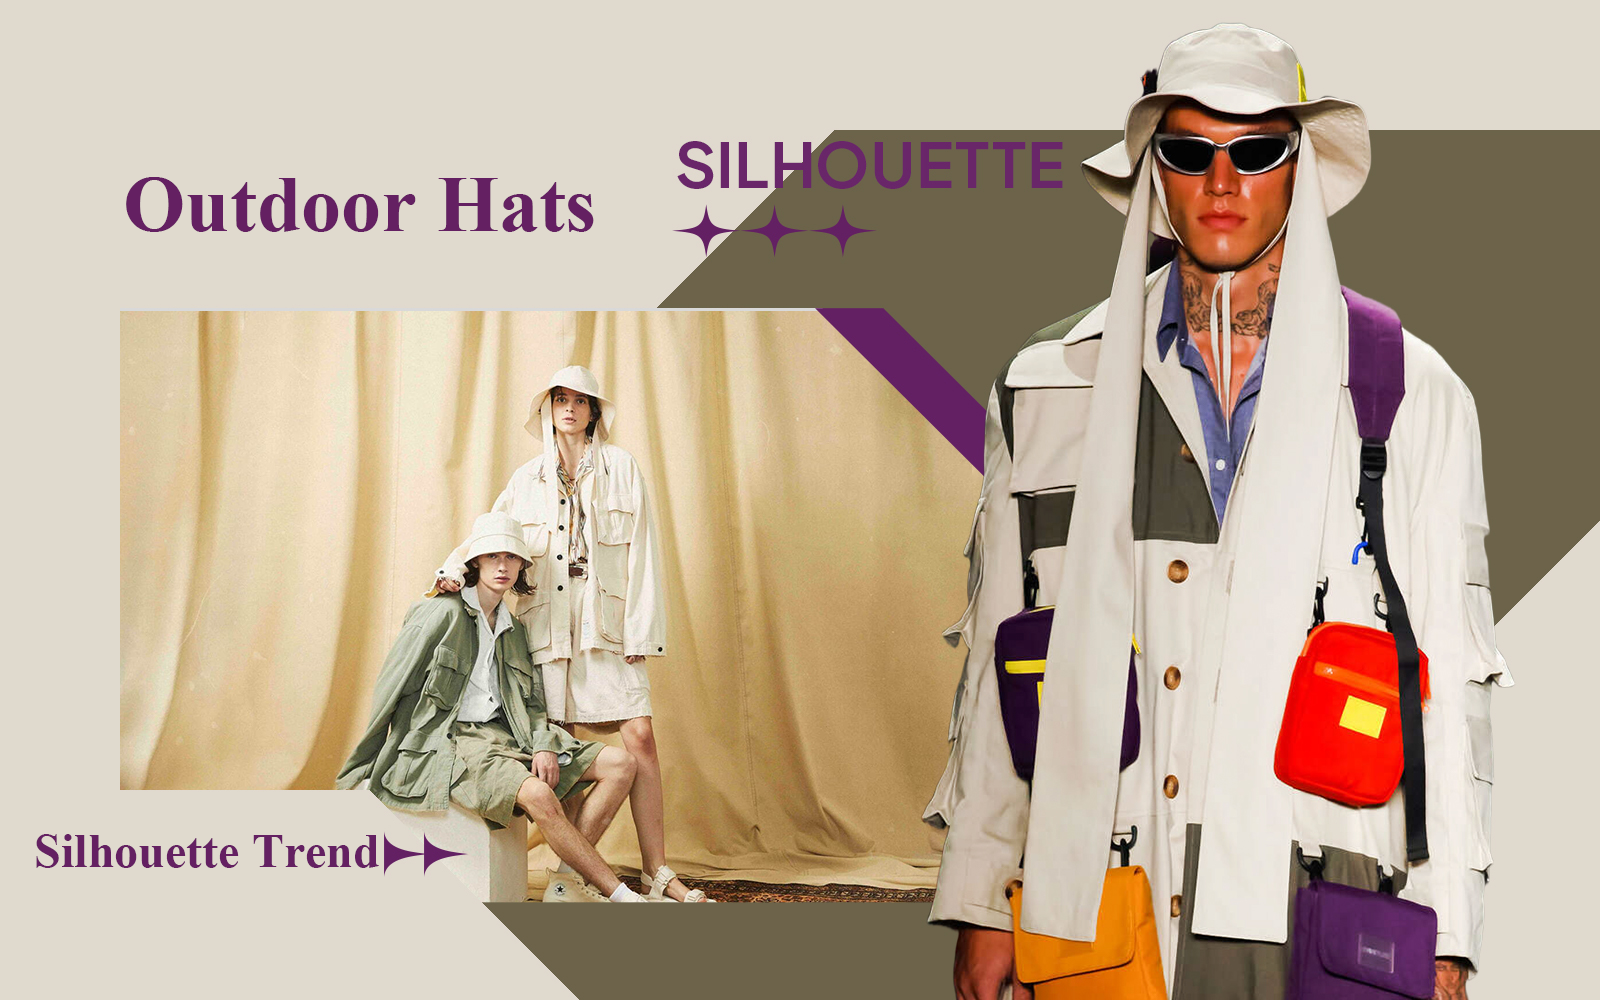 Outdoor Hat -- A/W 24/25 Silhouette Trend for Hats